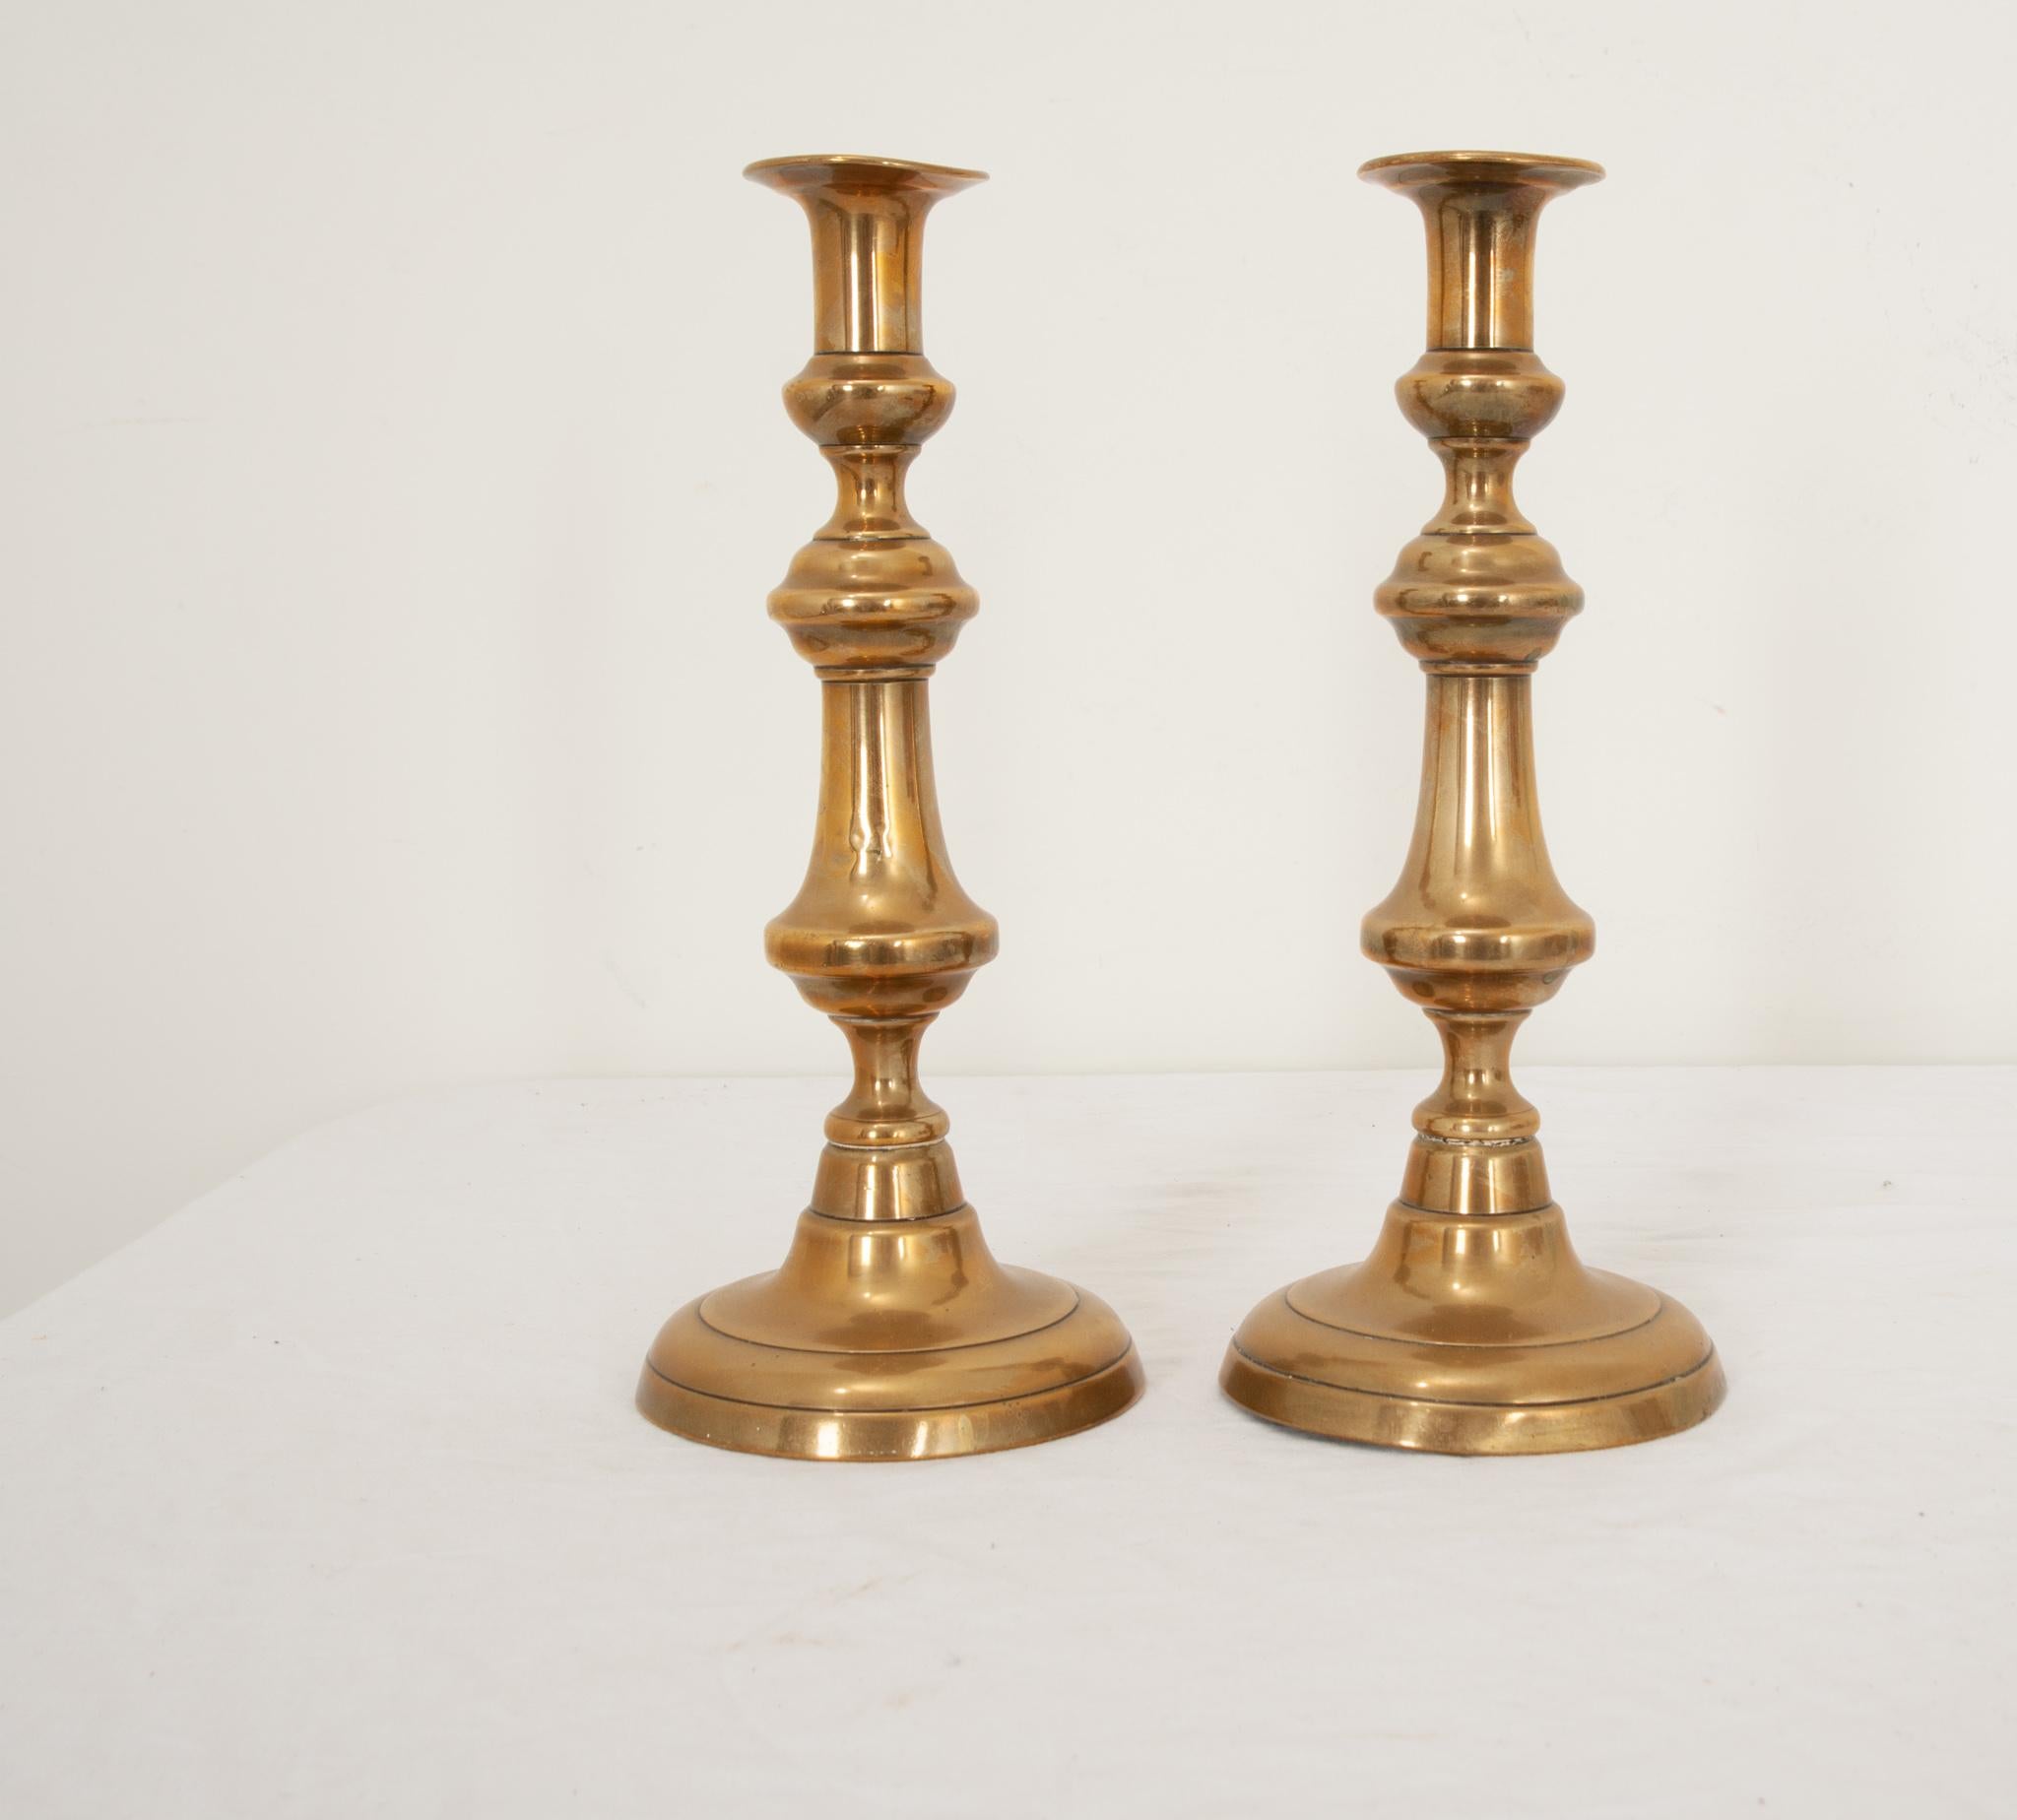 Cast Pair of Antique Brass Candlesticks For Sale